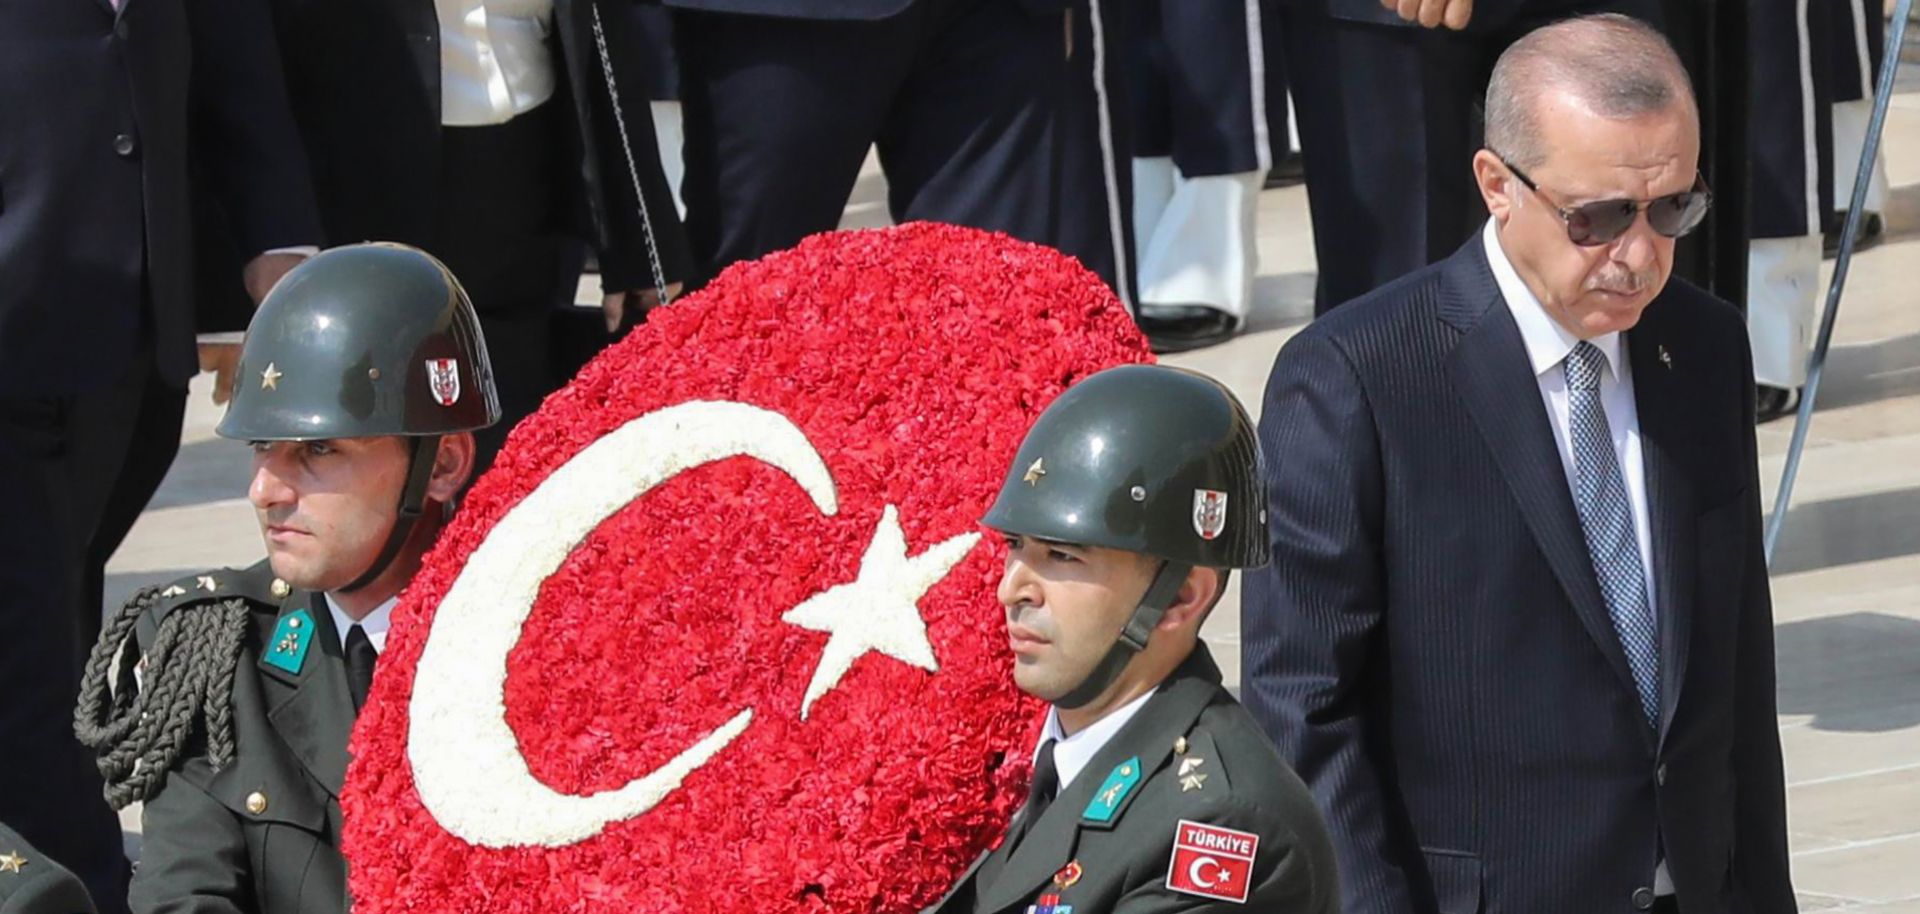 Turkish President Recep Tayyip Erdogan visits the tomb of modern Turkey's founder, Mustafa Kemal Ataturk, to commemorate the 96th anniversary of the country's independence.